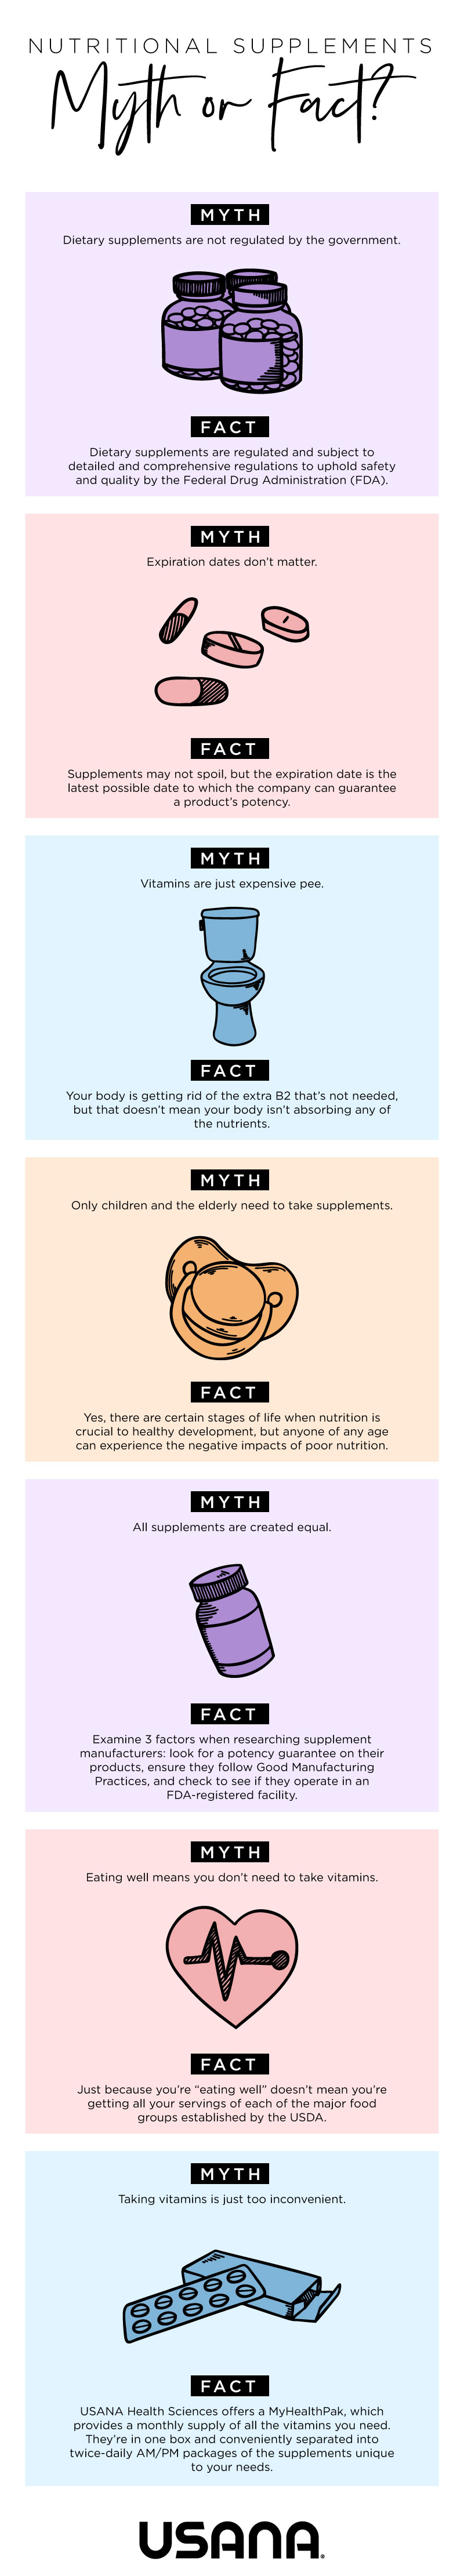 nutritional supplements: infographic 